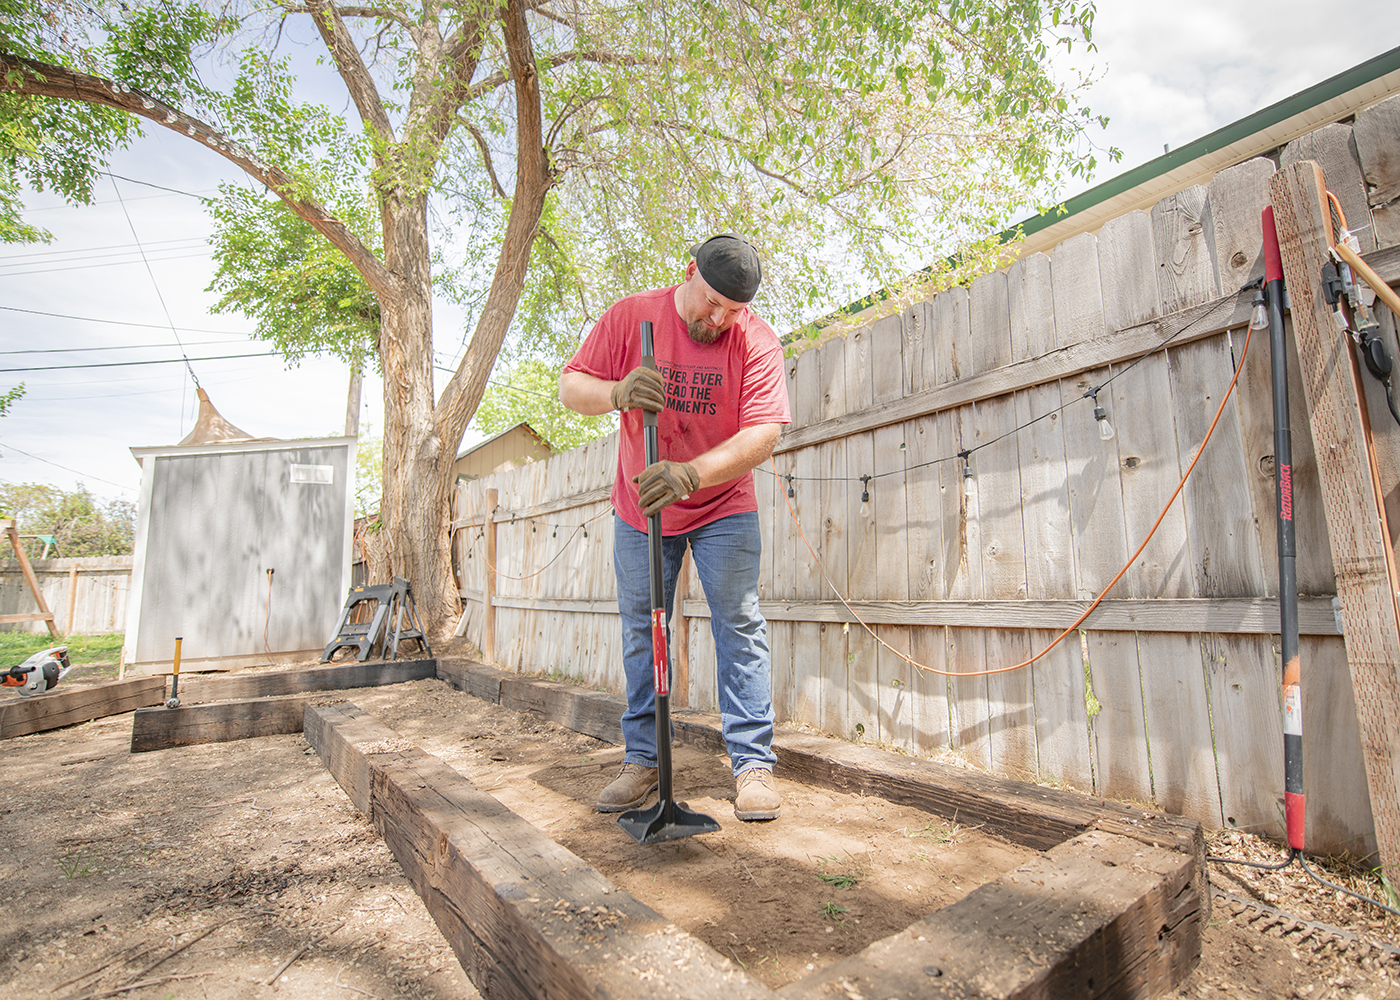 Nate day tamping down dirt in backyard remodel for traeger smoker